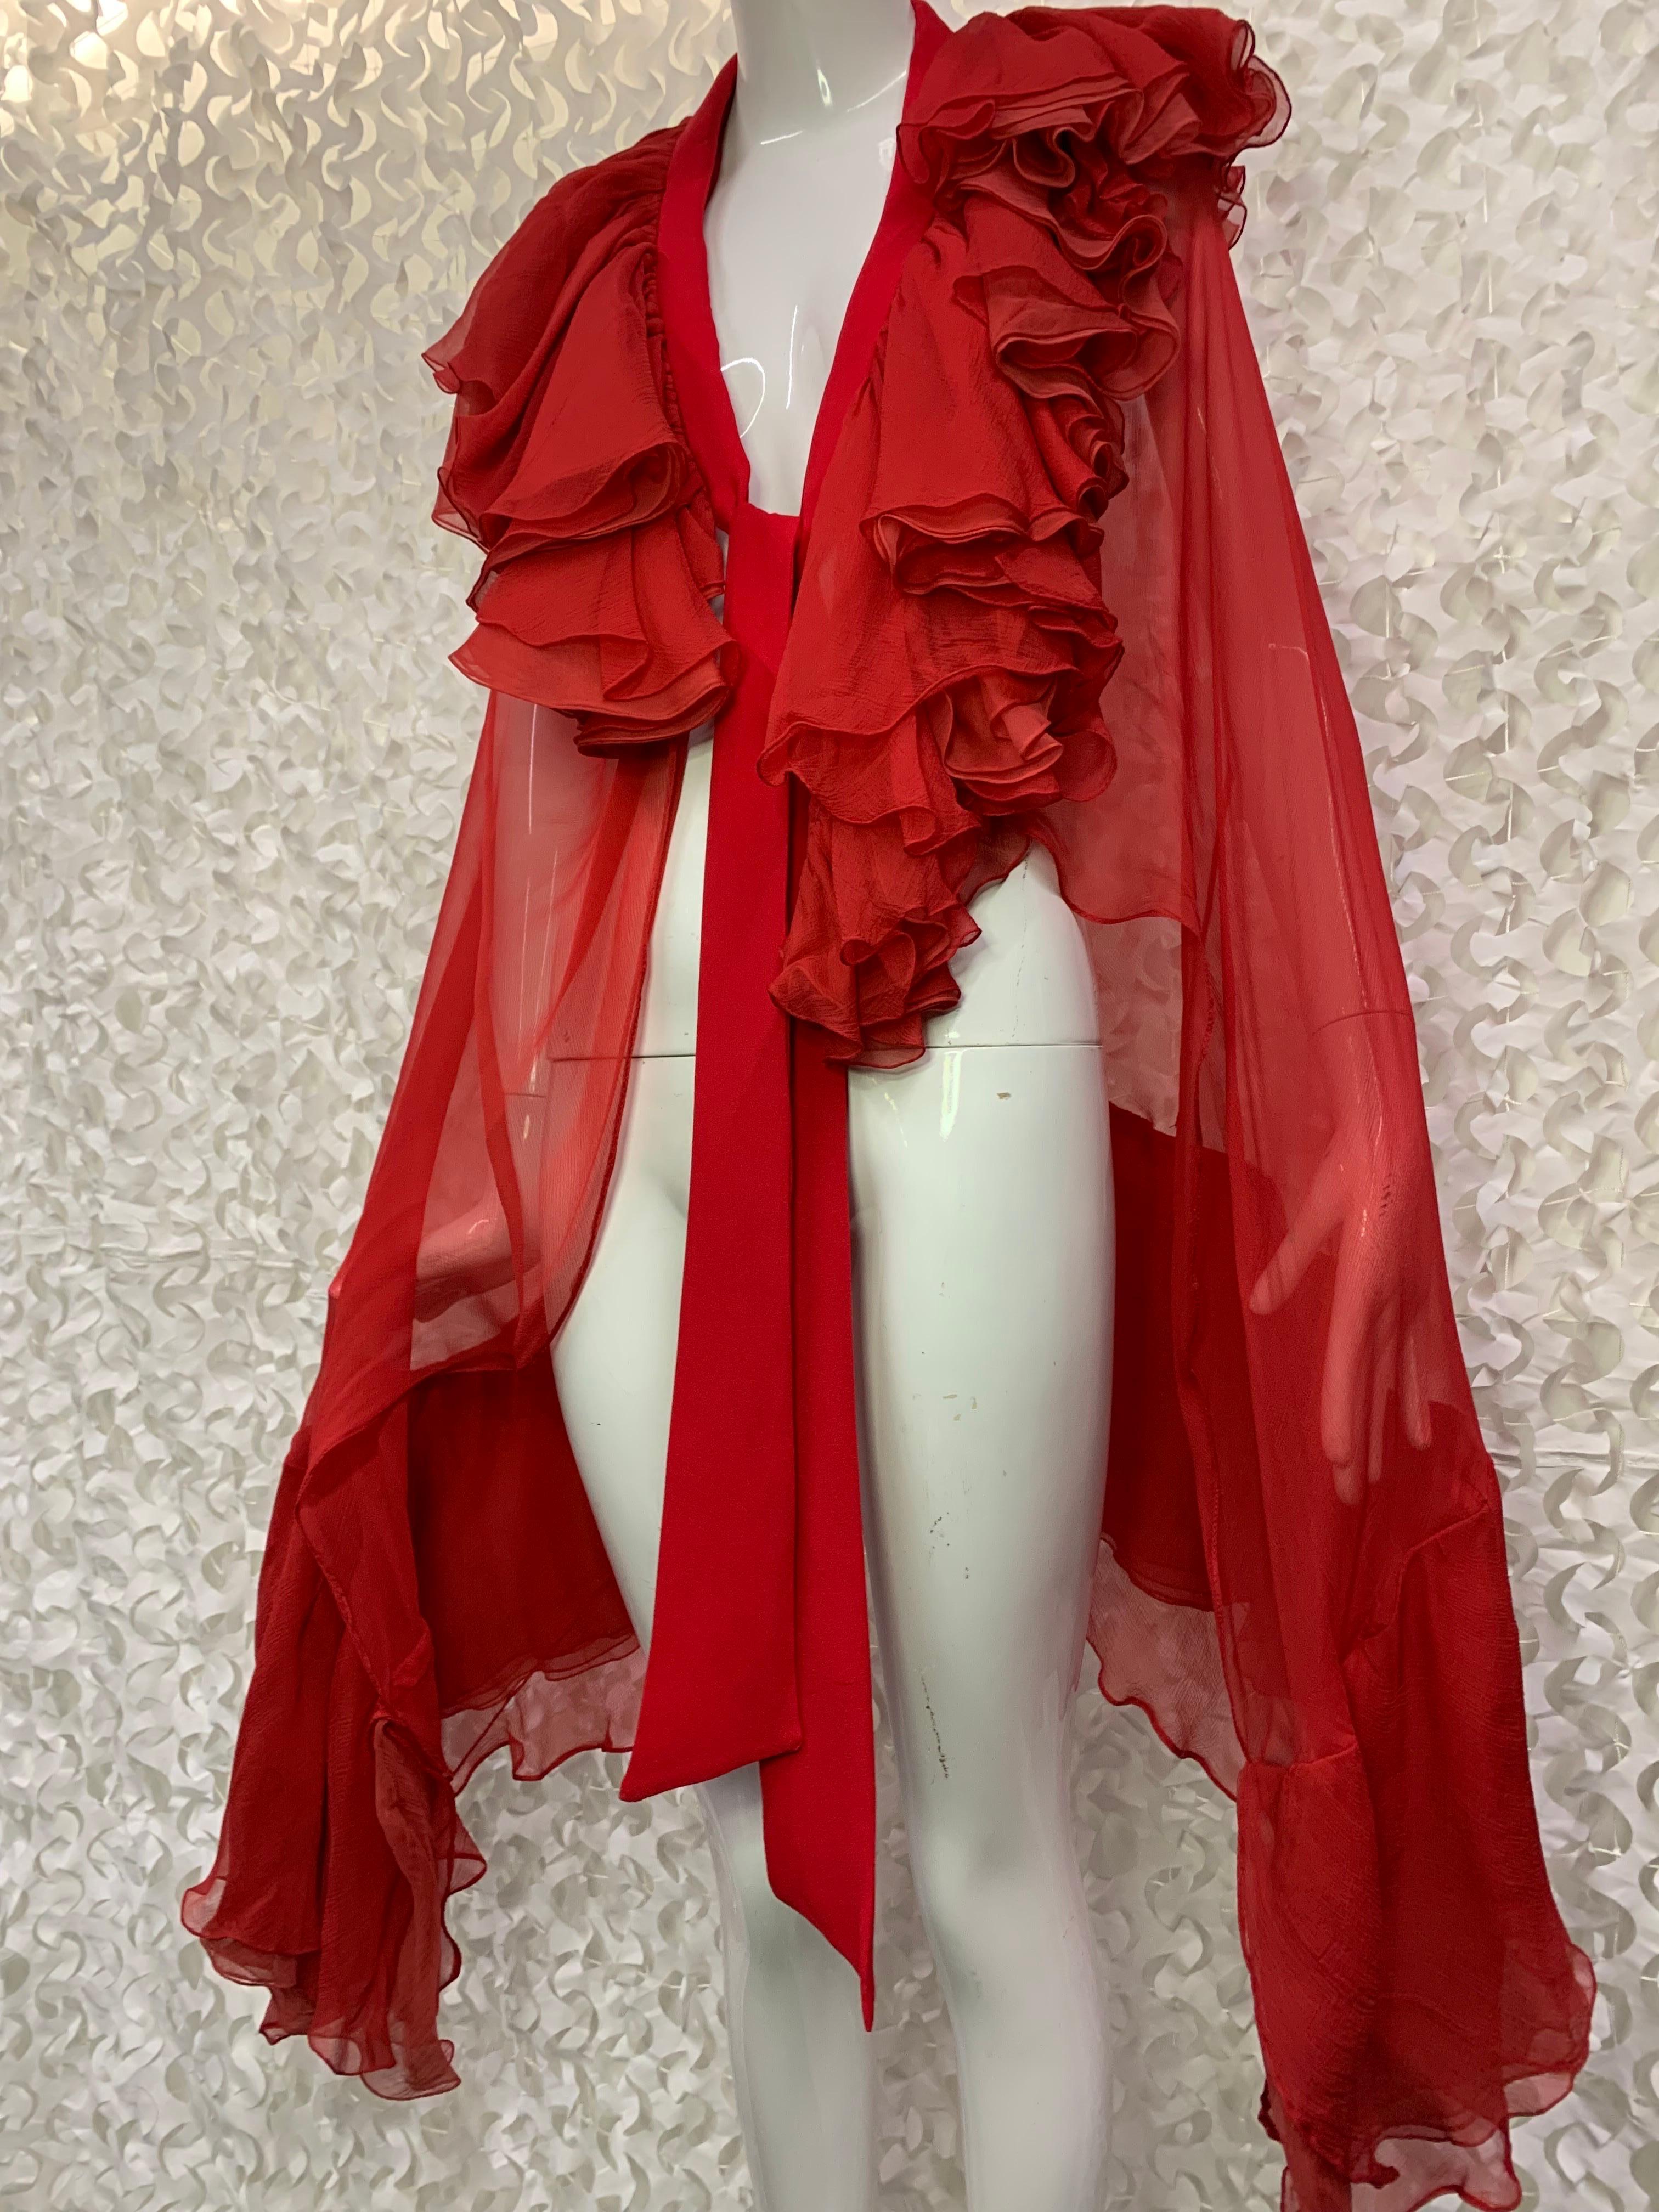 Torso Creations Crimson Red Silk Chiffon Cape w Lush Ruffles & Silk Foulard Tie. Inspired by 1920s Art-Deco chic, these layered asymmetrical ruffles are bias cut and hand rolled in varying shades of red. All fabric reimagined from a Pauline Trigere